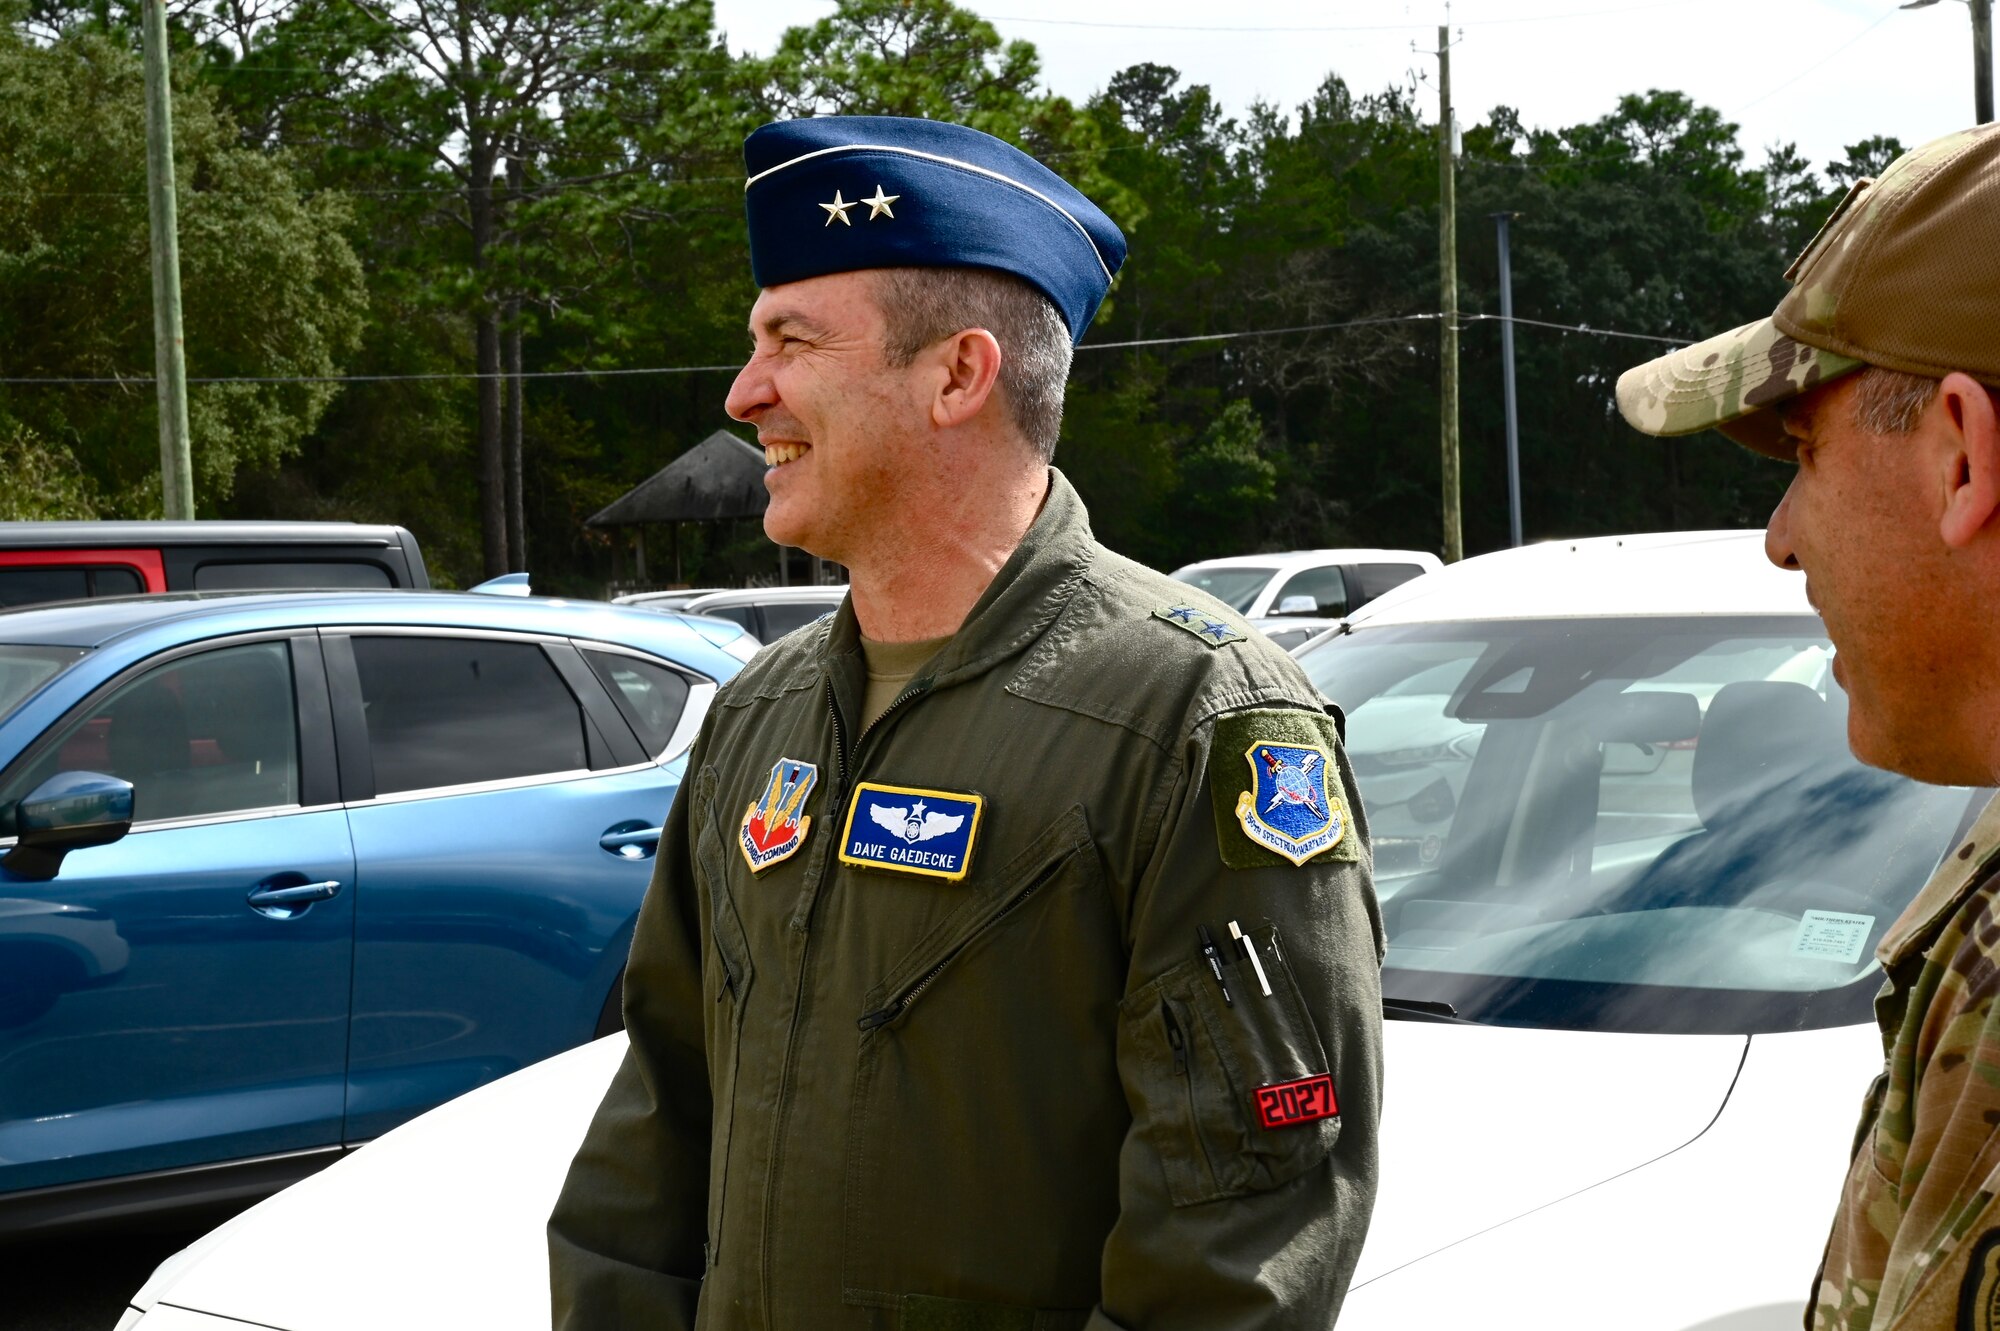 U.S. Air Force Maj. Gen. David Gaedecke, 16th Air Forces (Air Forces Cyber) vice commander, visits the 350th Spectrum Warfare Wing at Eglin Air Force Base, Fla., March 1, 2023. Gaedecke visited to see how the wing's missions are providing the Combat Air Force with the electronic warfare capabilities needed to win. (U.S. Air Force photo by 1st Lt. Benjamin Aronson)